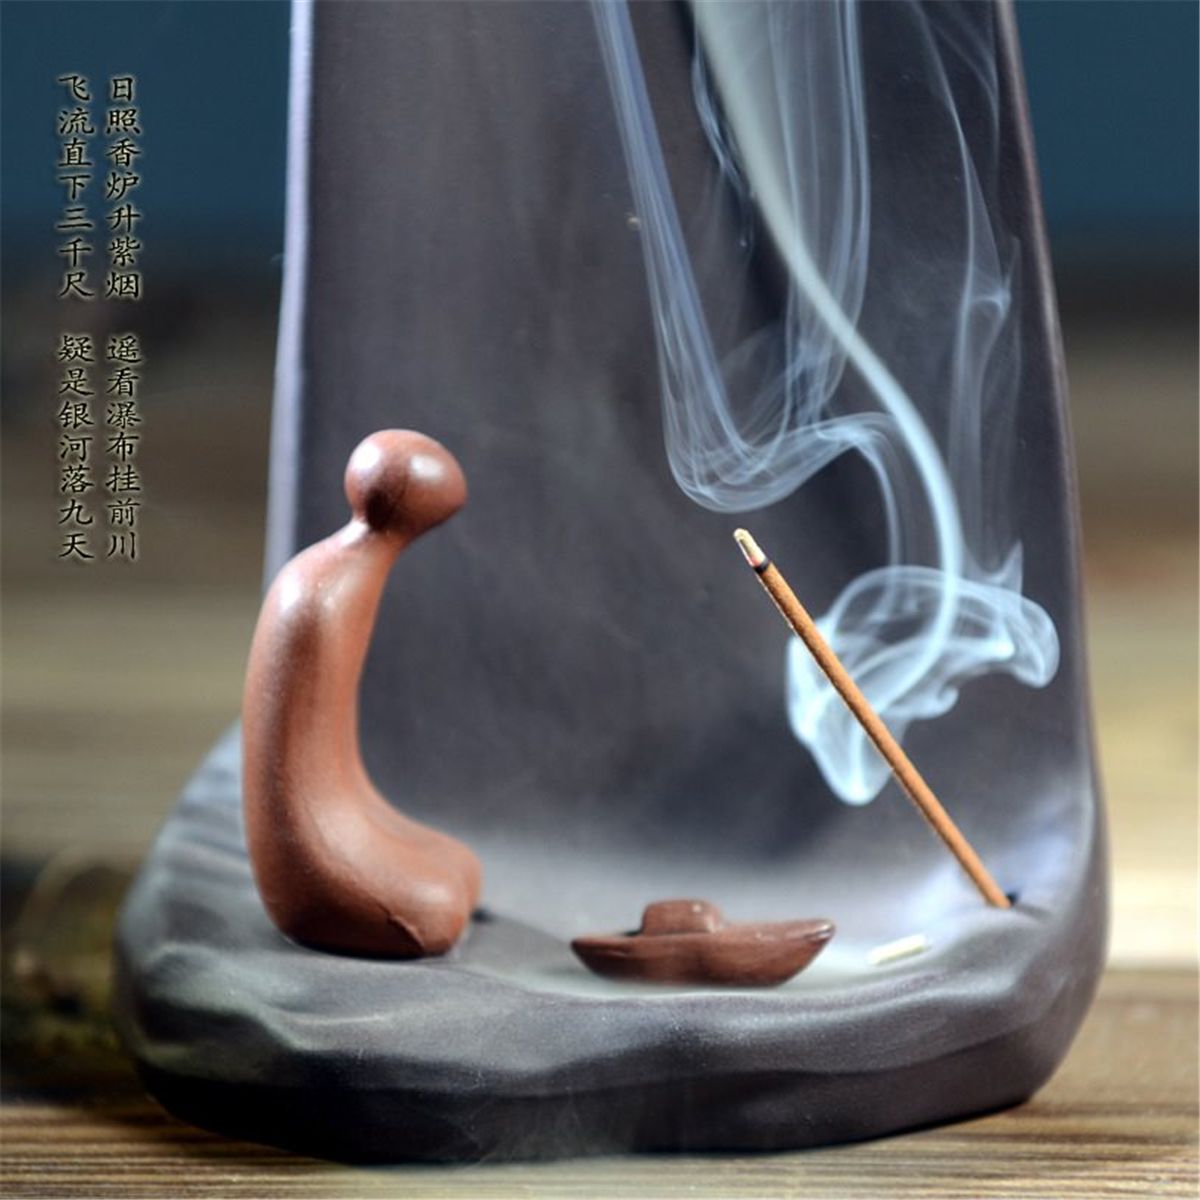 Backflow-Incense-Burner-Mountain-Ceramic-Home-Office-Teahouse-Yoga-Room-Decor-With-10-Cones-1441903